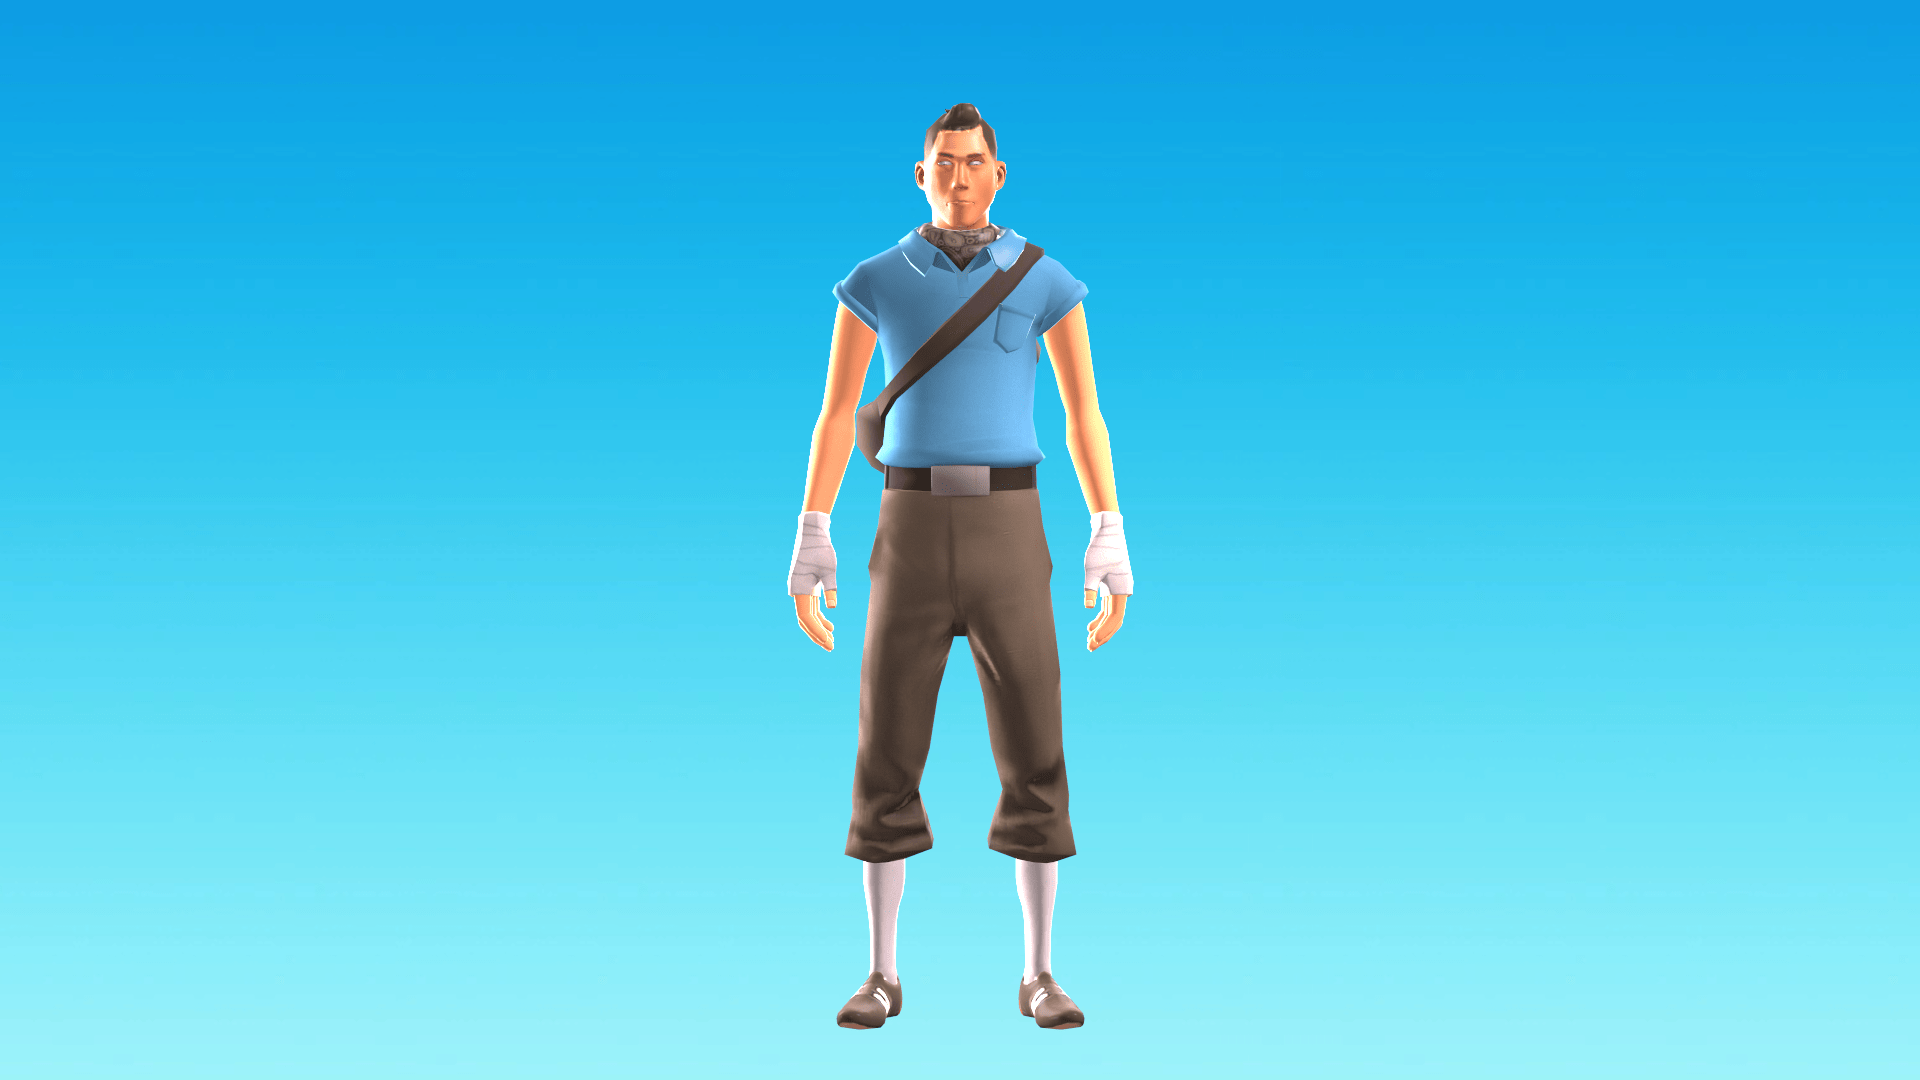 Pose goes back to T-pose in render - Animation and Rigging